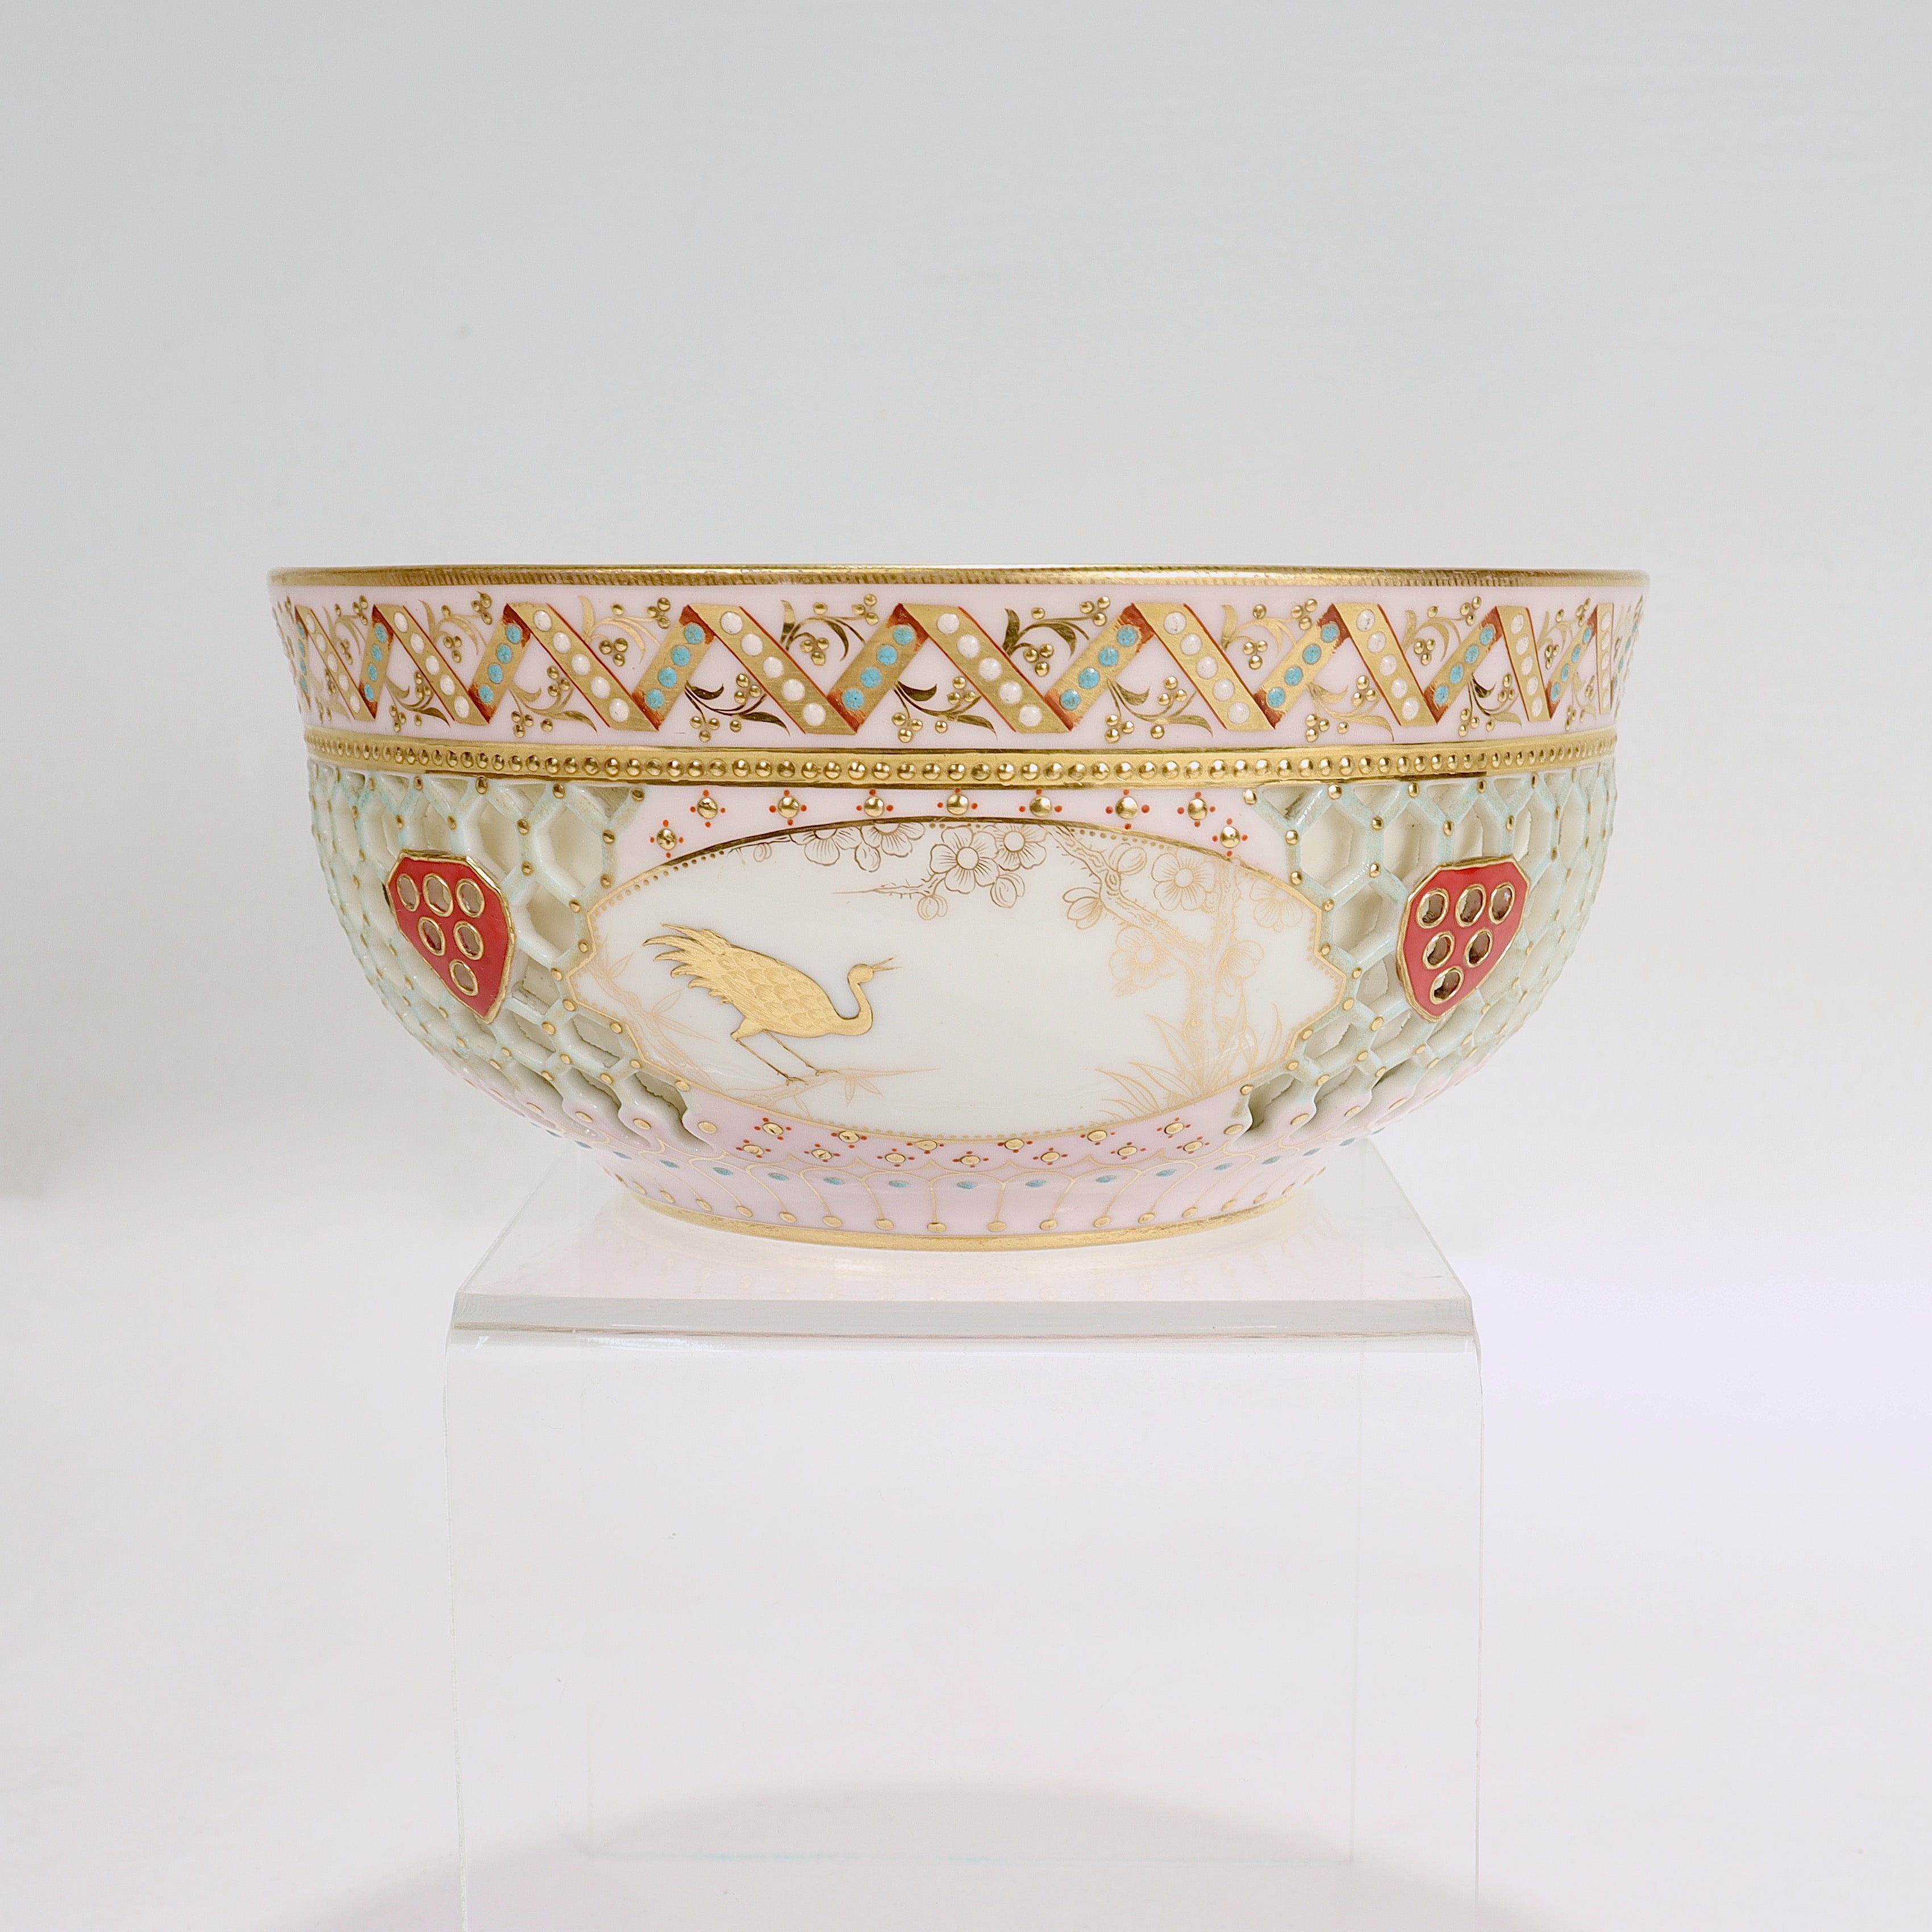 A fine antique Aesthetic Period gilt and reticulated porcelain bowl.

By the Royal Worcester Porcelain Manufactory.

Attributed to George Owen & the gilder Samuel Ranford.

Of double-walled construction with a pink ground, turquoise & white